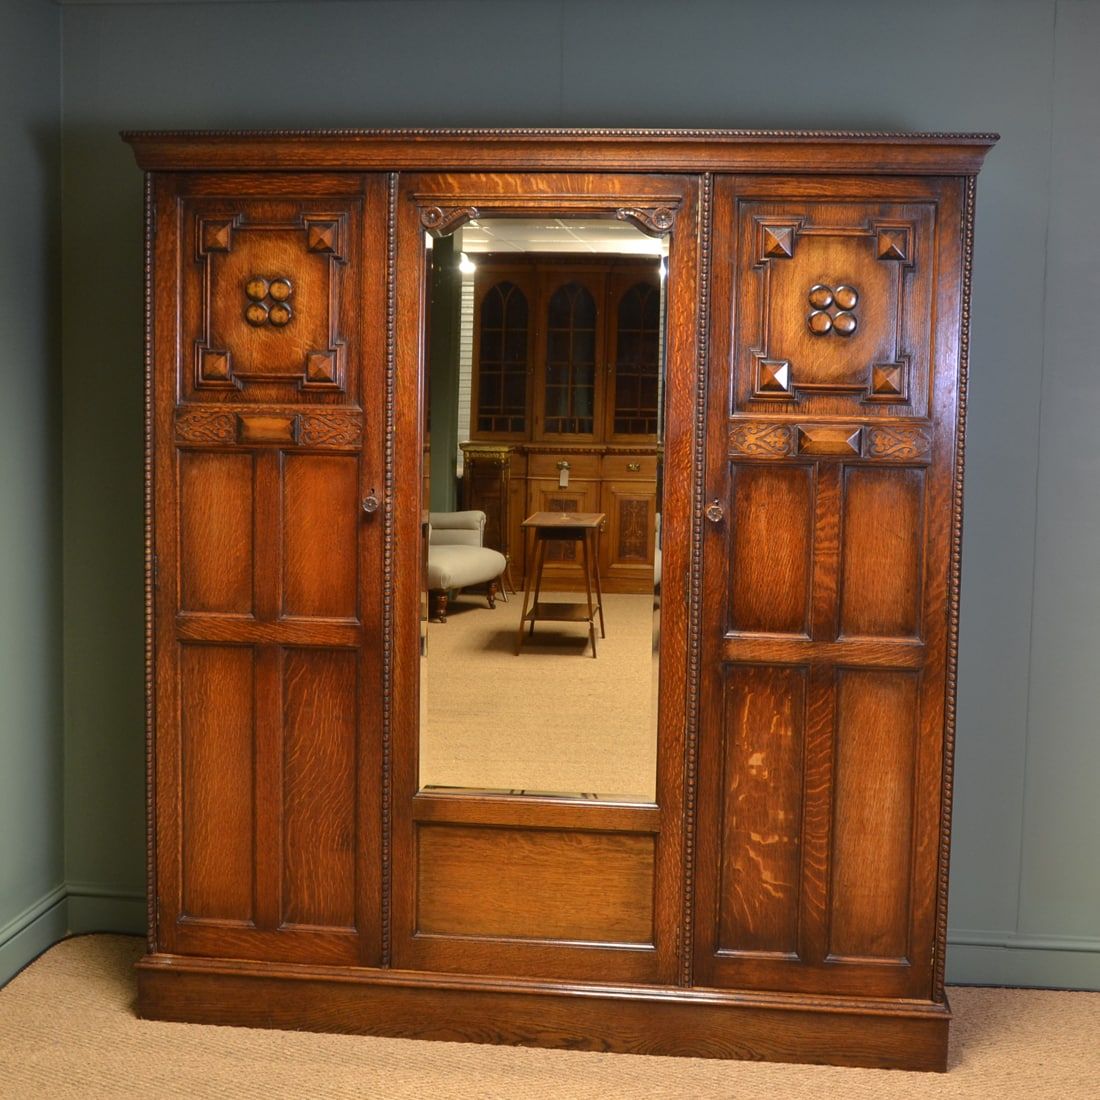 Antique Wardrobes For Sale – Victorian, Georgian & Edwardian With Regard To Victorian Wardrobes For Sale (Photo 6 of 15)